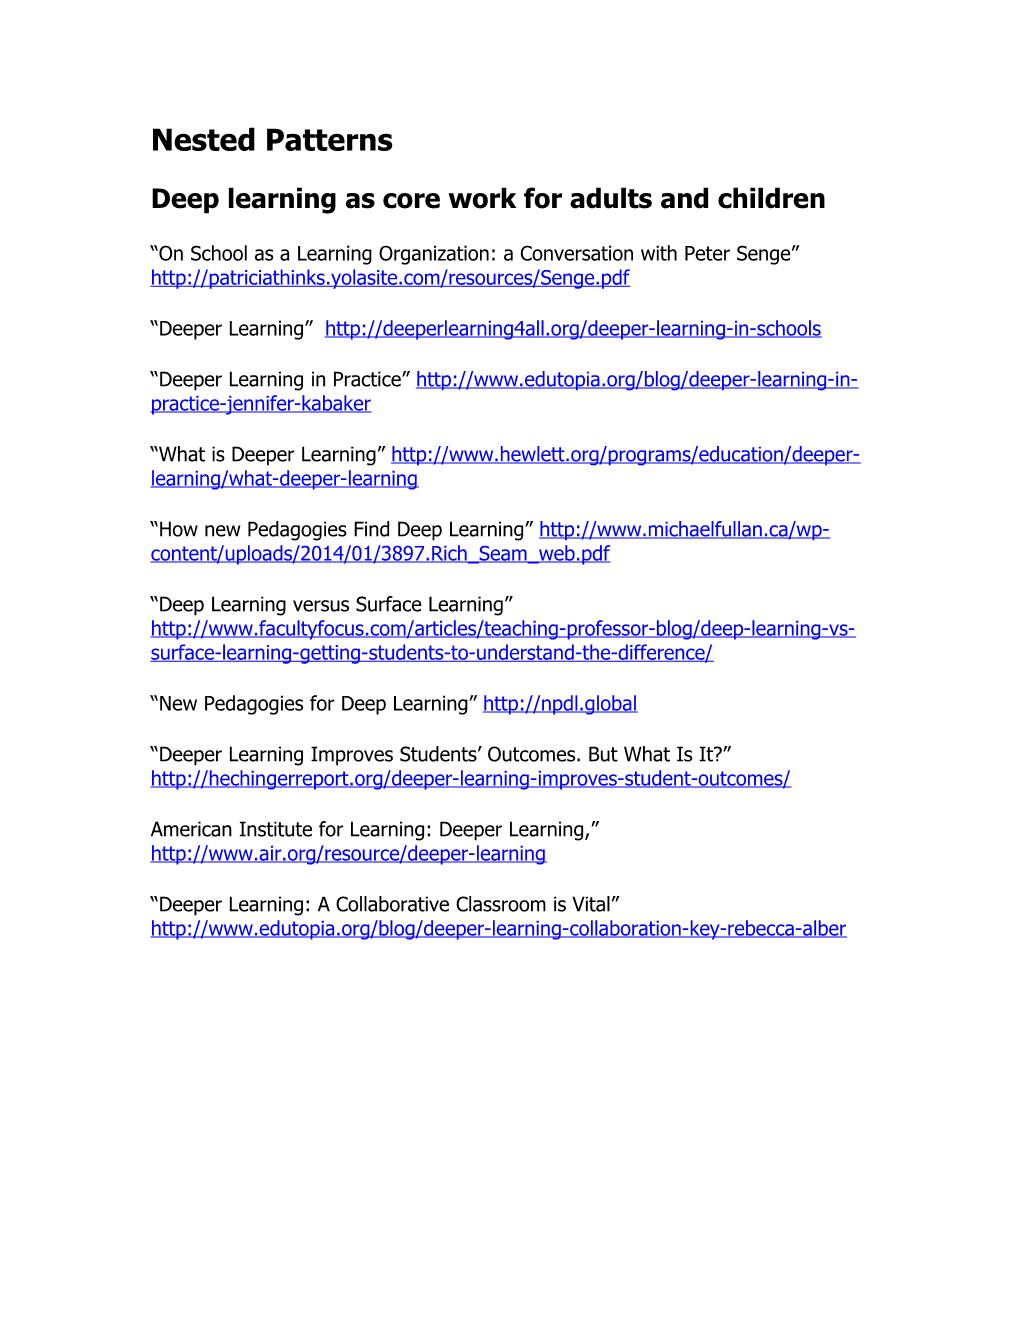 Deep Learning As Core Work for Adults and Children